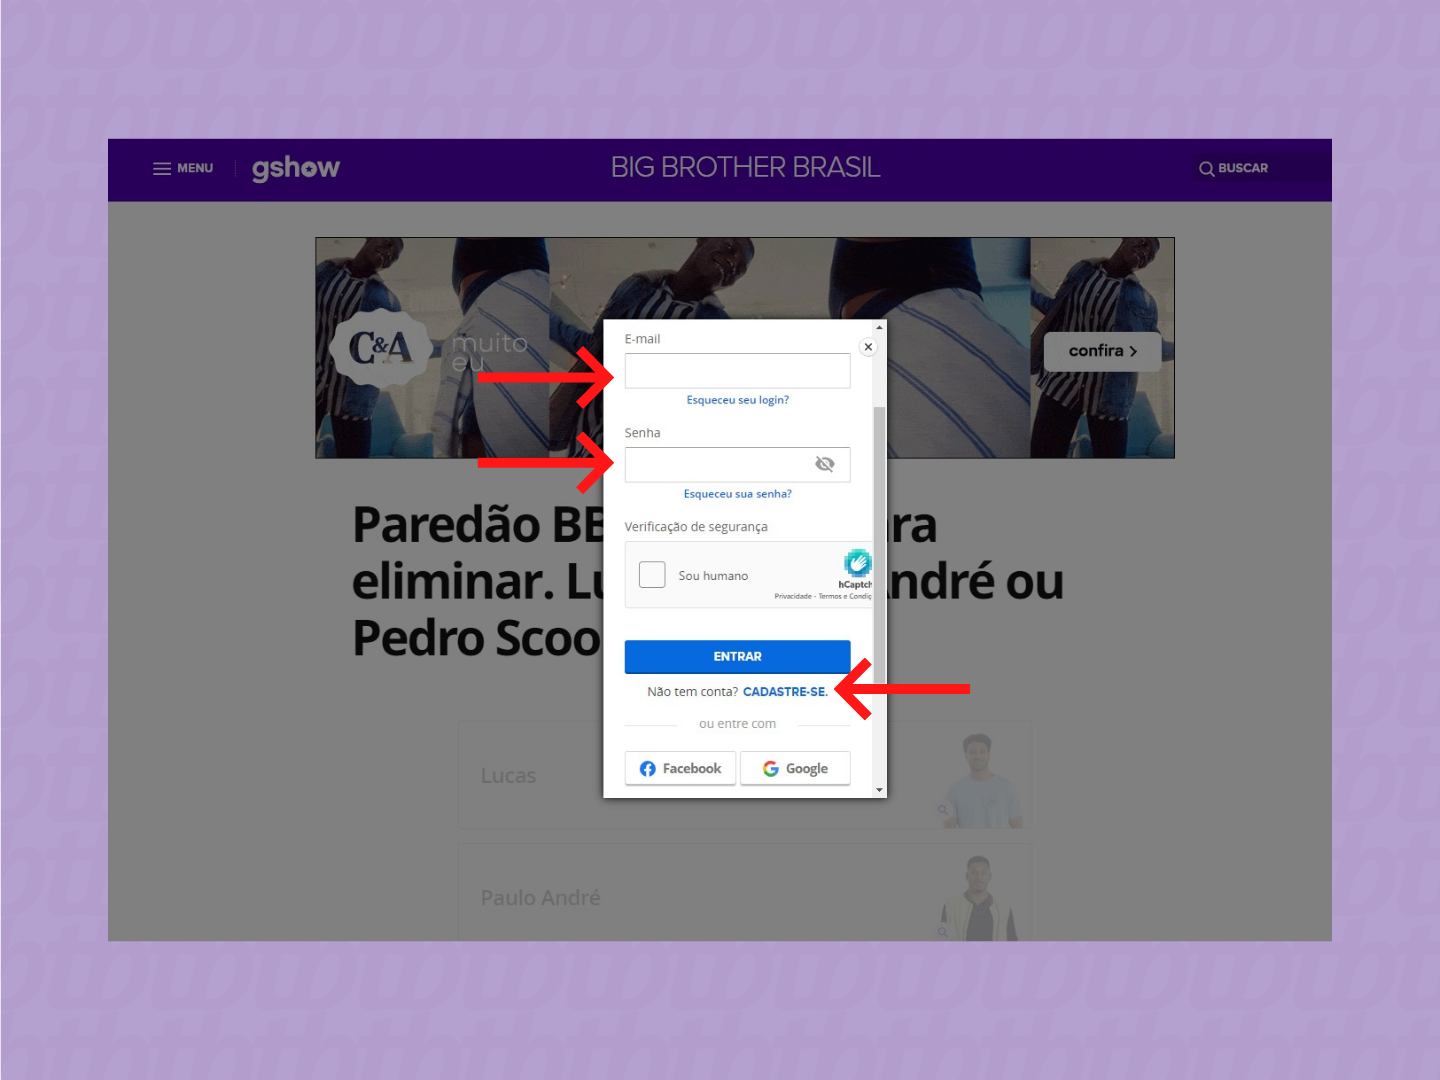 How to vote for Big Brother Brasil / Gshow / Reproduction